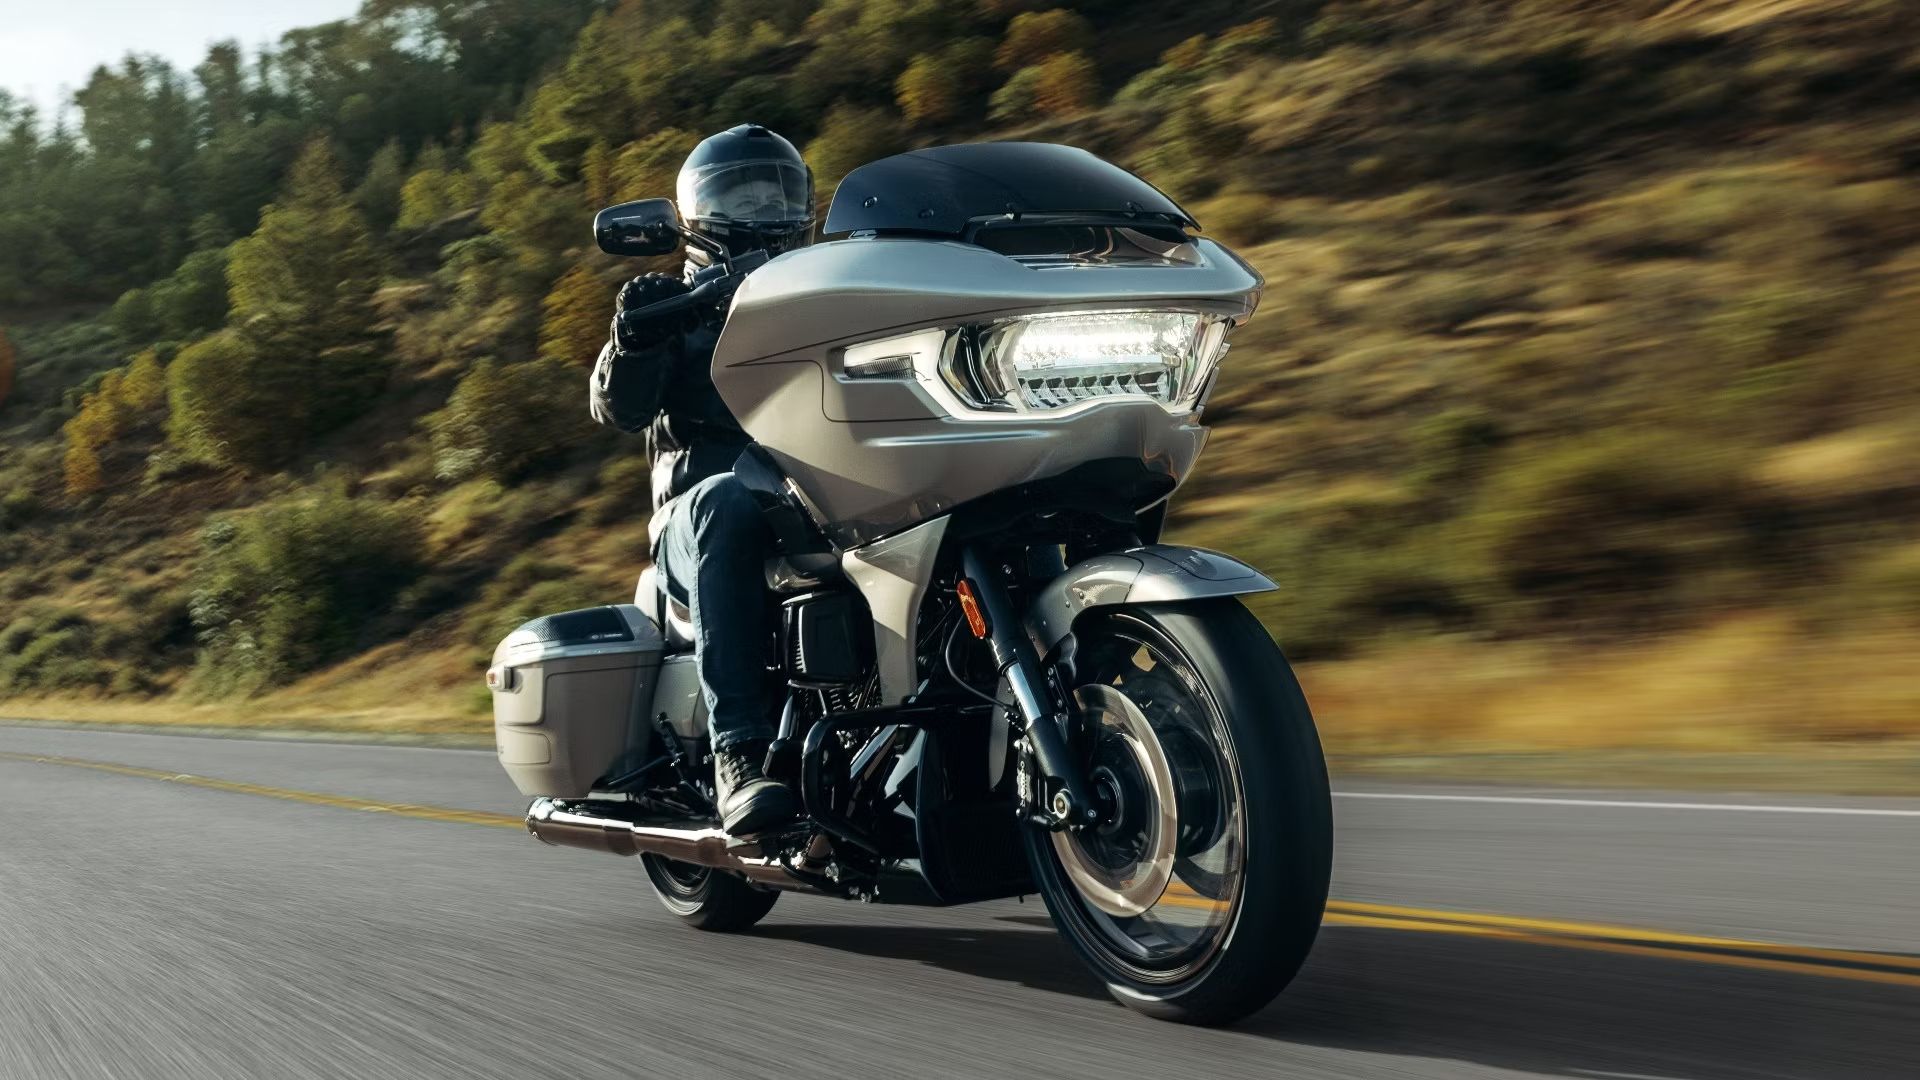 These Are The 10 Best HarleyDavidson Motorcycles On The Market